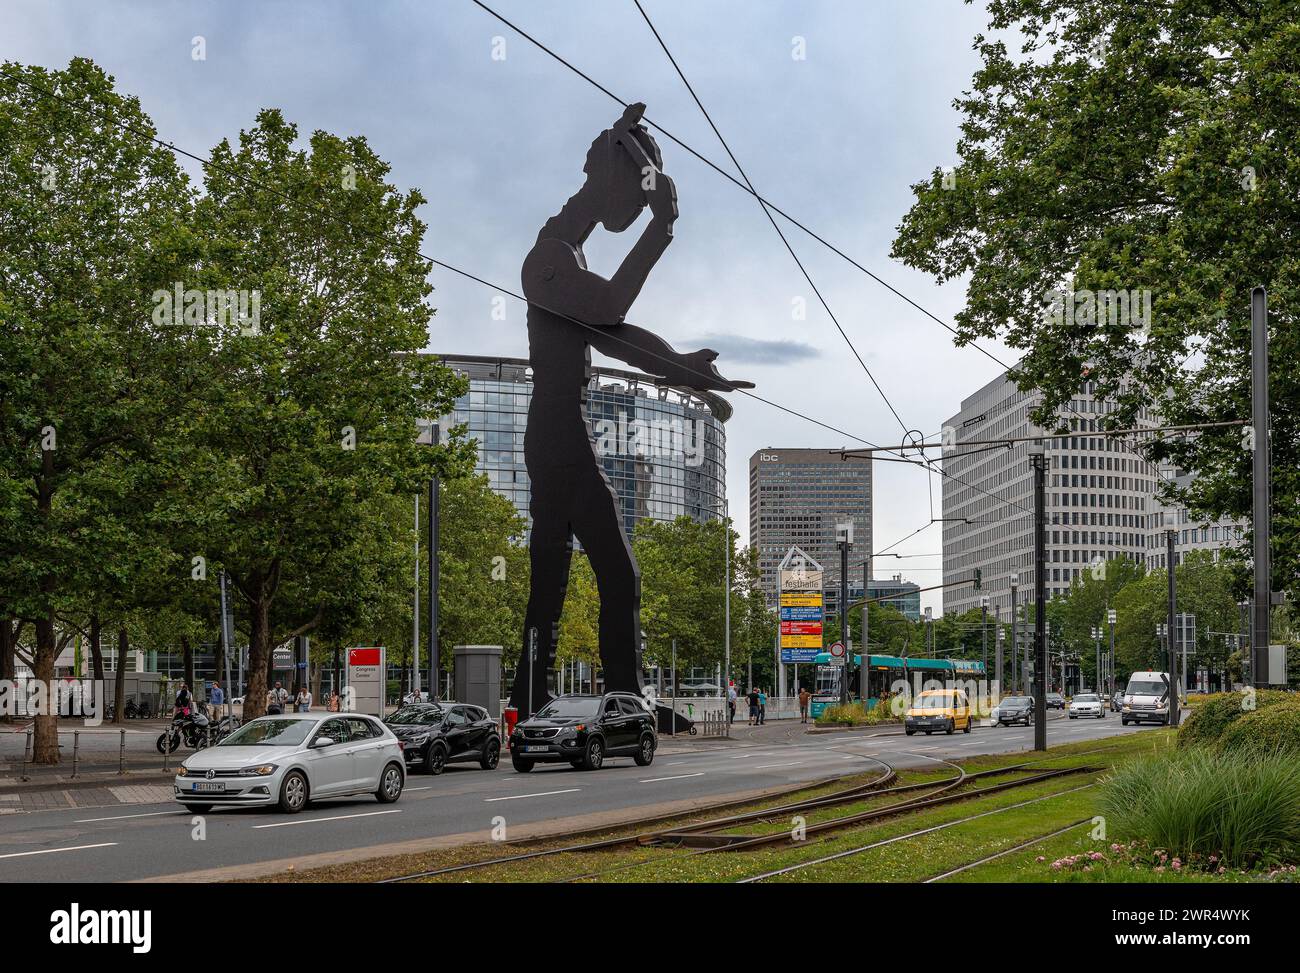 The Hammering Man, sculpture in front of the Messeturm in Frankfurt, Hesse, Germany Stock Photo